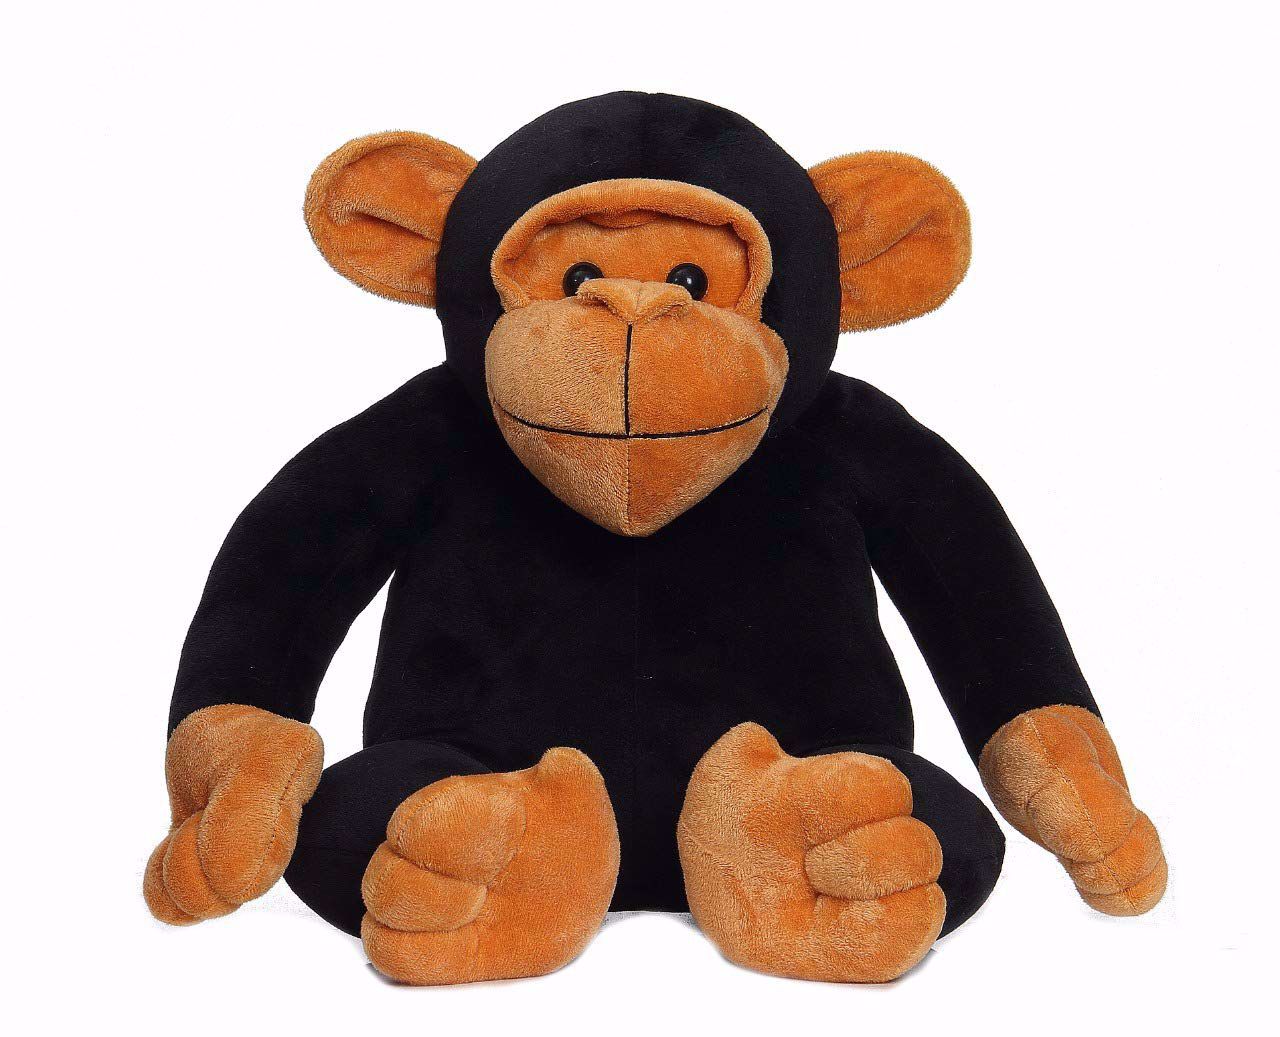 Big Monkey Soft Toy Soft Toy Monkey Soft Monkey Buy Baby Products